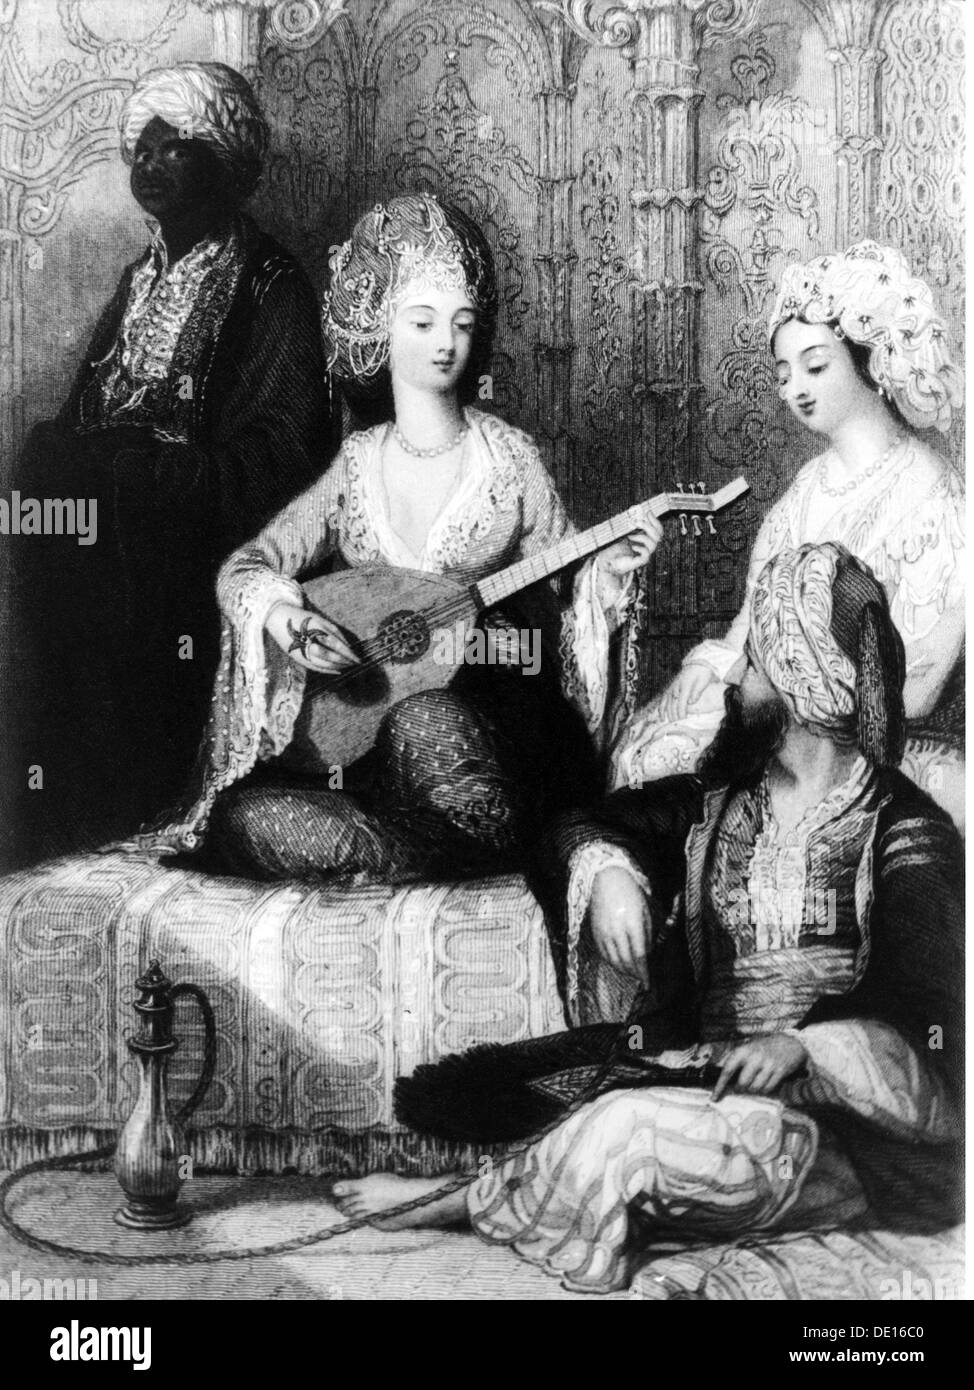 music,musician,mandolin playing lady of the harem,lithograph,early 19th century,serail,seraglio,lady of the harem,odalisque,odalisk,pasha,eunuch,men,man,women,people,East,Orient,Islamic district,make music,play music,making music,playing music,makes music,plays music,made music,played music,stringed instrument,string instrument,stringed instruments,string instruments,plucked instrument,plucked instruments,musical instrument,instrument,musical instruments,instruments,hookah,hookahs,mandolin,mandolins,playing,play,histor,Additional-Rights-Clearences-Not Available Stock Photo